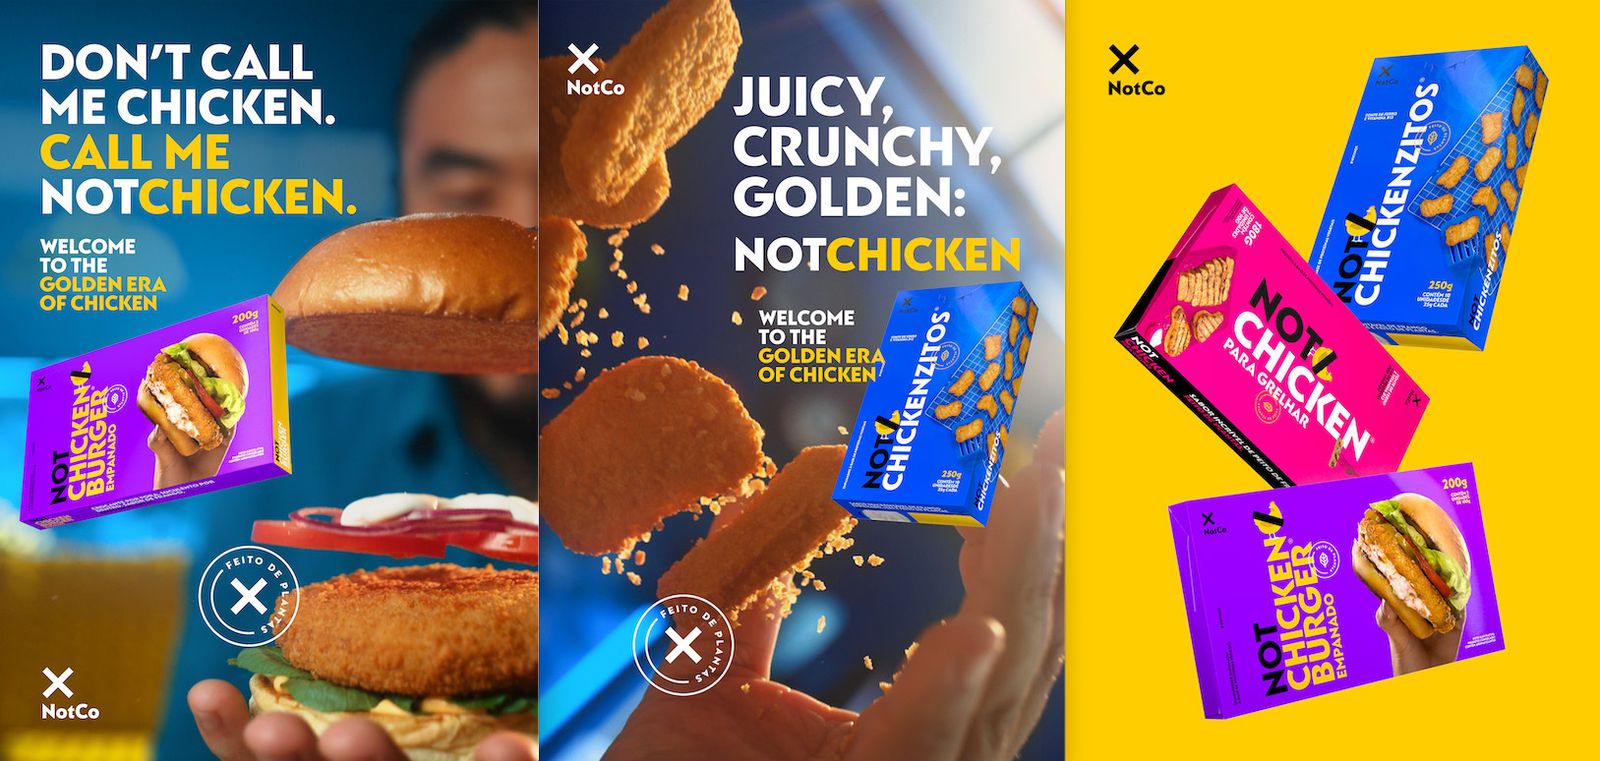 Three ads for NotChicken: One featuring a chicken sandwich and the NotChicken Burger box, one with a hand tossing NotChickenzitos nuggets, and one with boxes of the three NotChicken products.